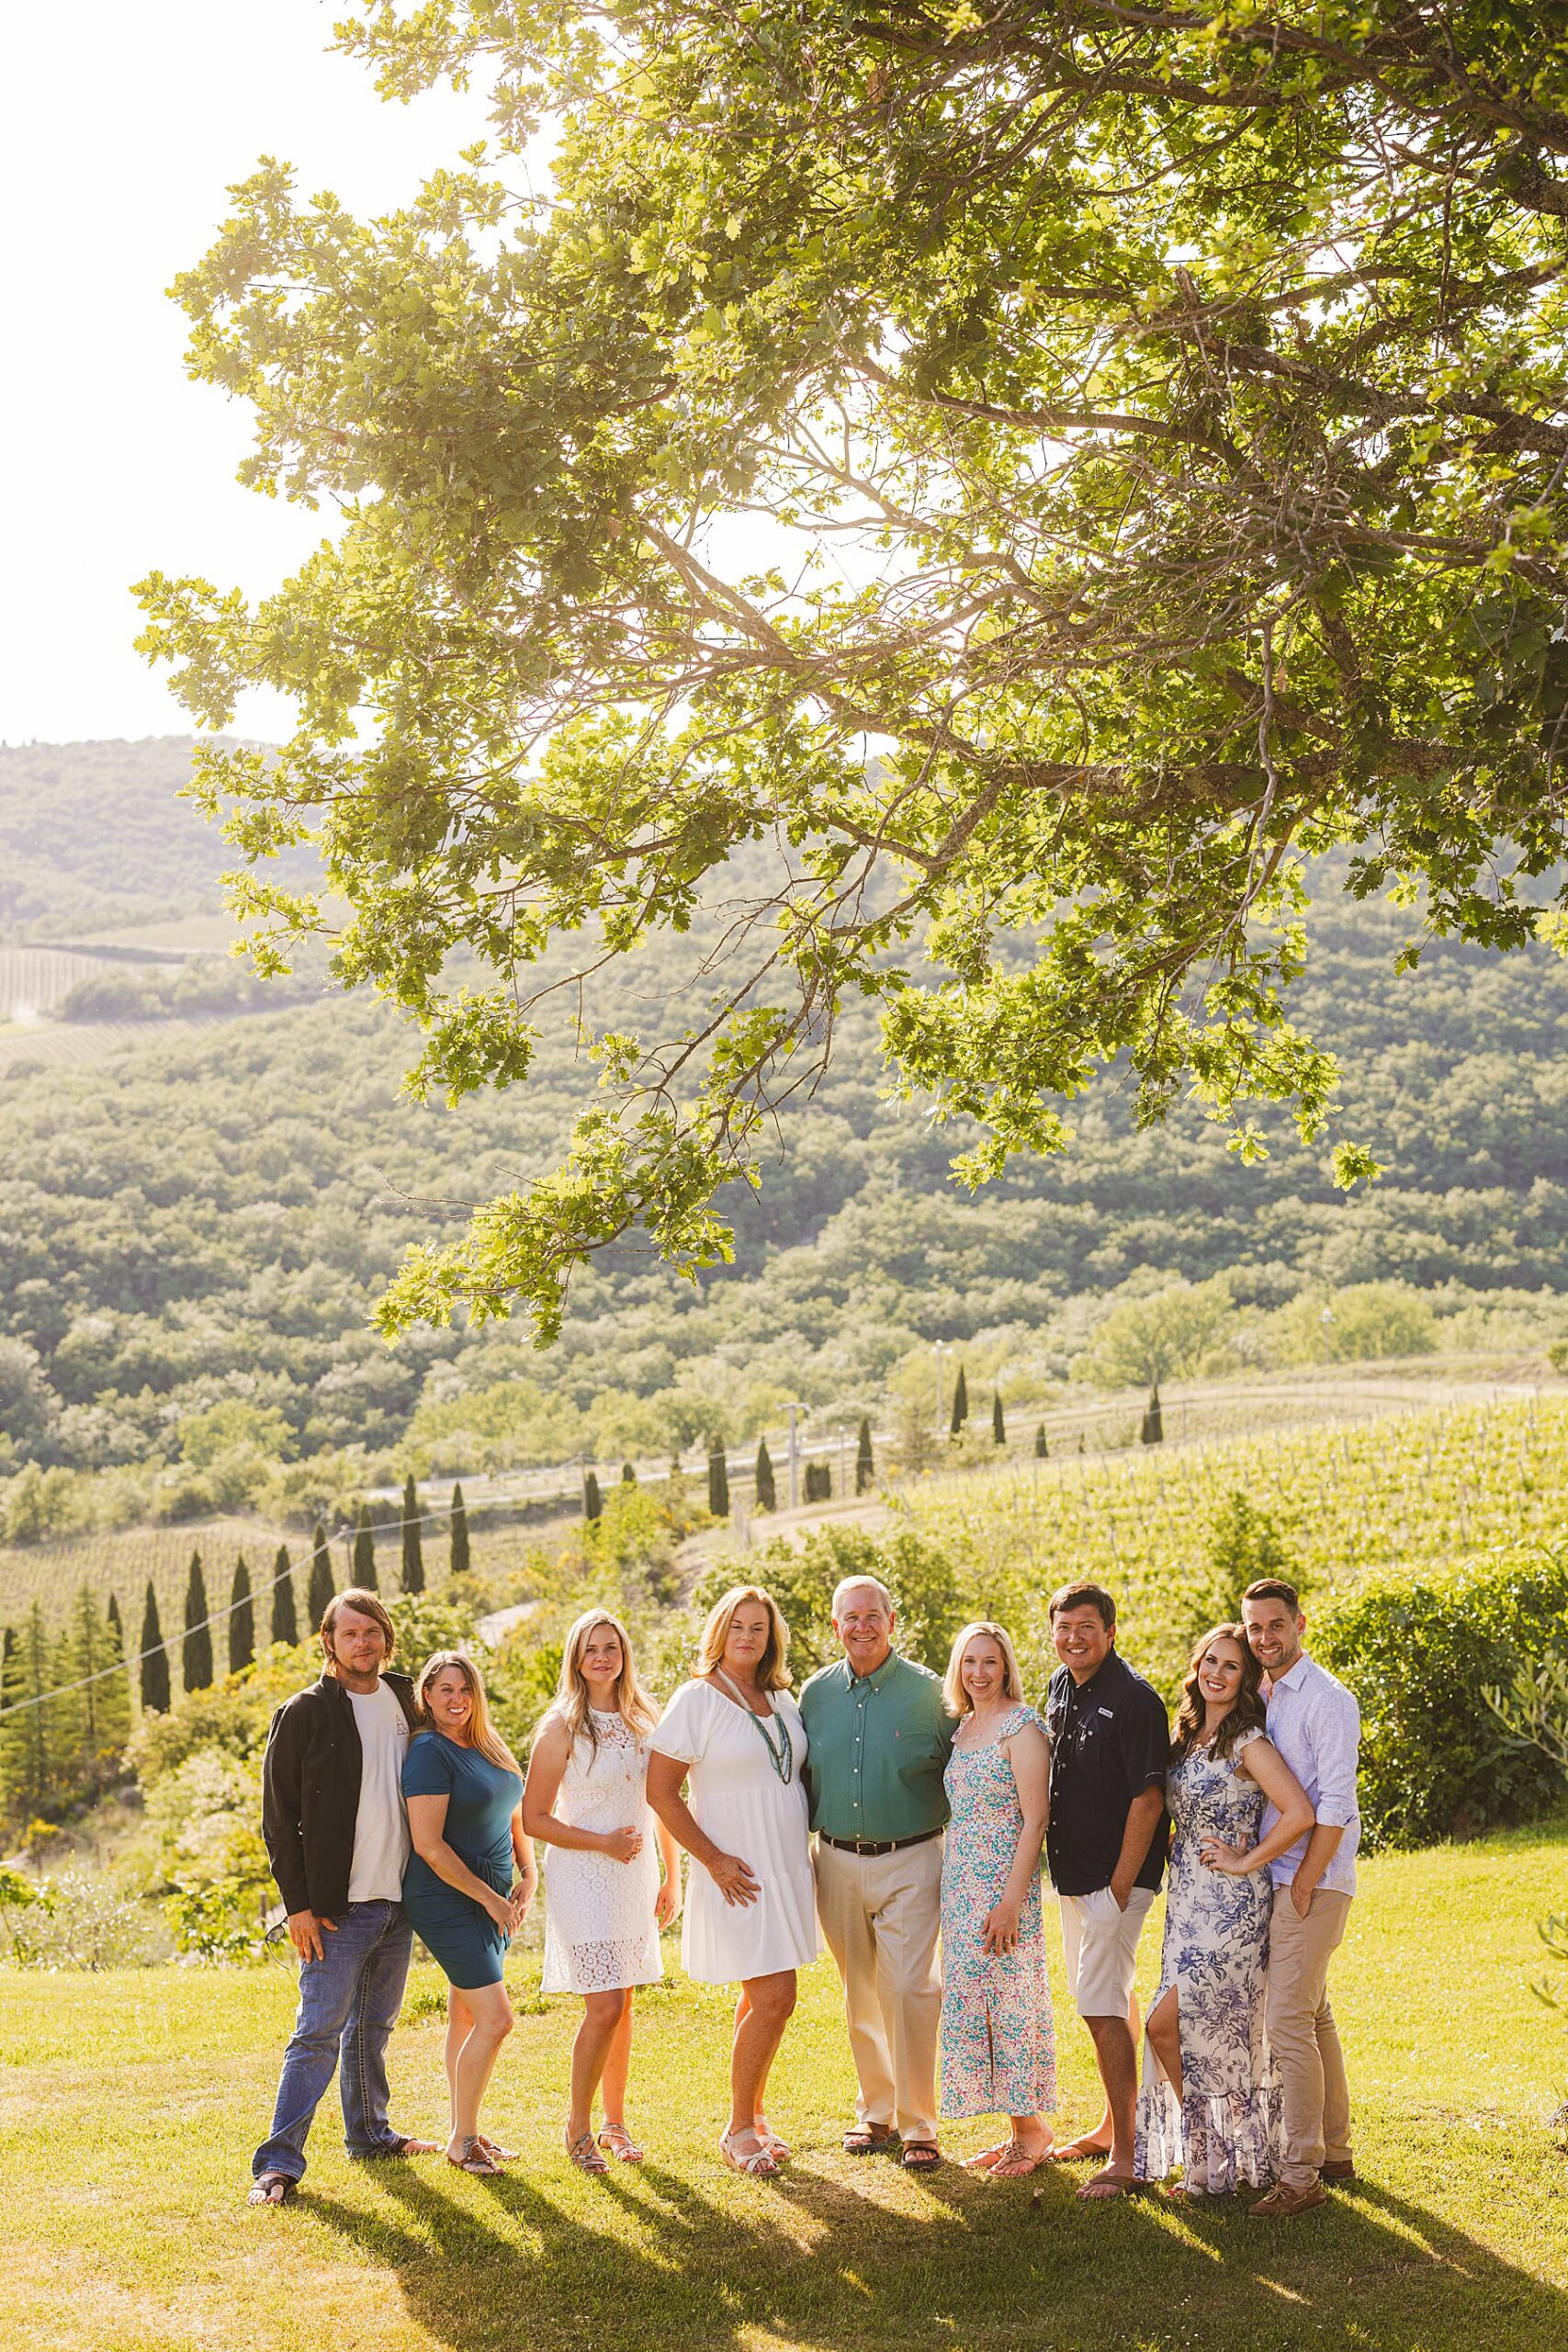 Evocative family session in the iconic and charming Gaiole in Chianti, in the heart of Tuscany countryside